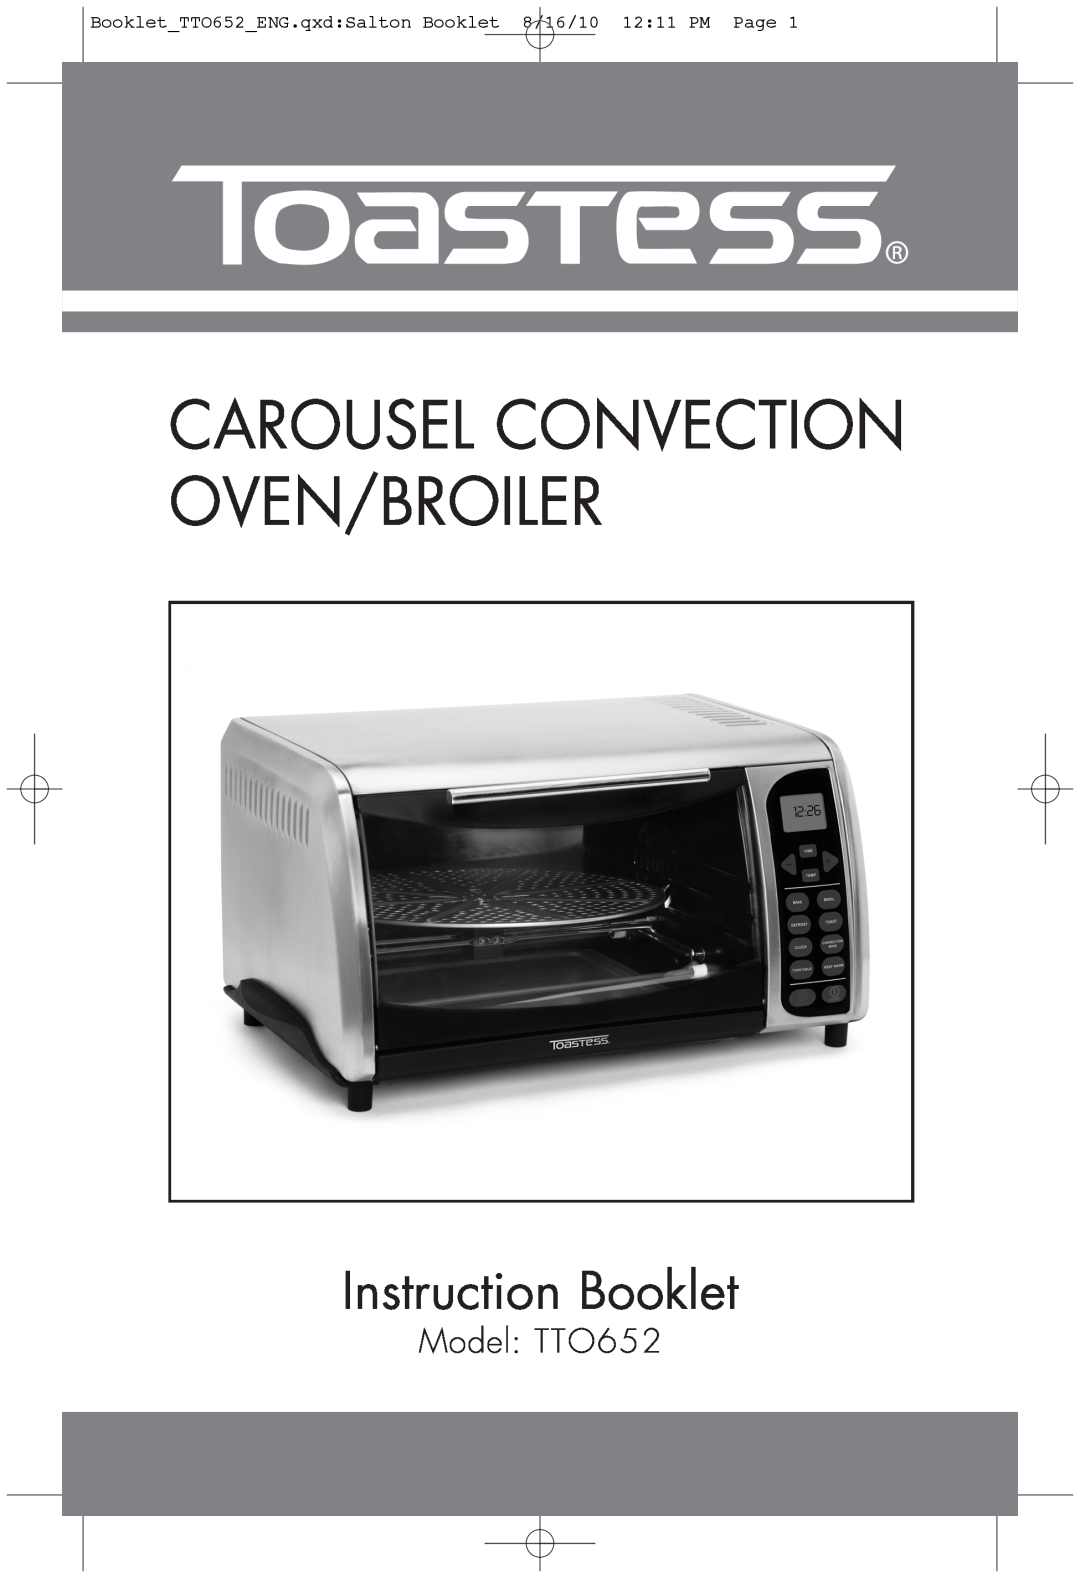 Toastess manual Model TTO652, Carousel Convection Oven/Broiler, Instruction Booklet 